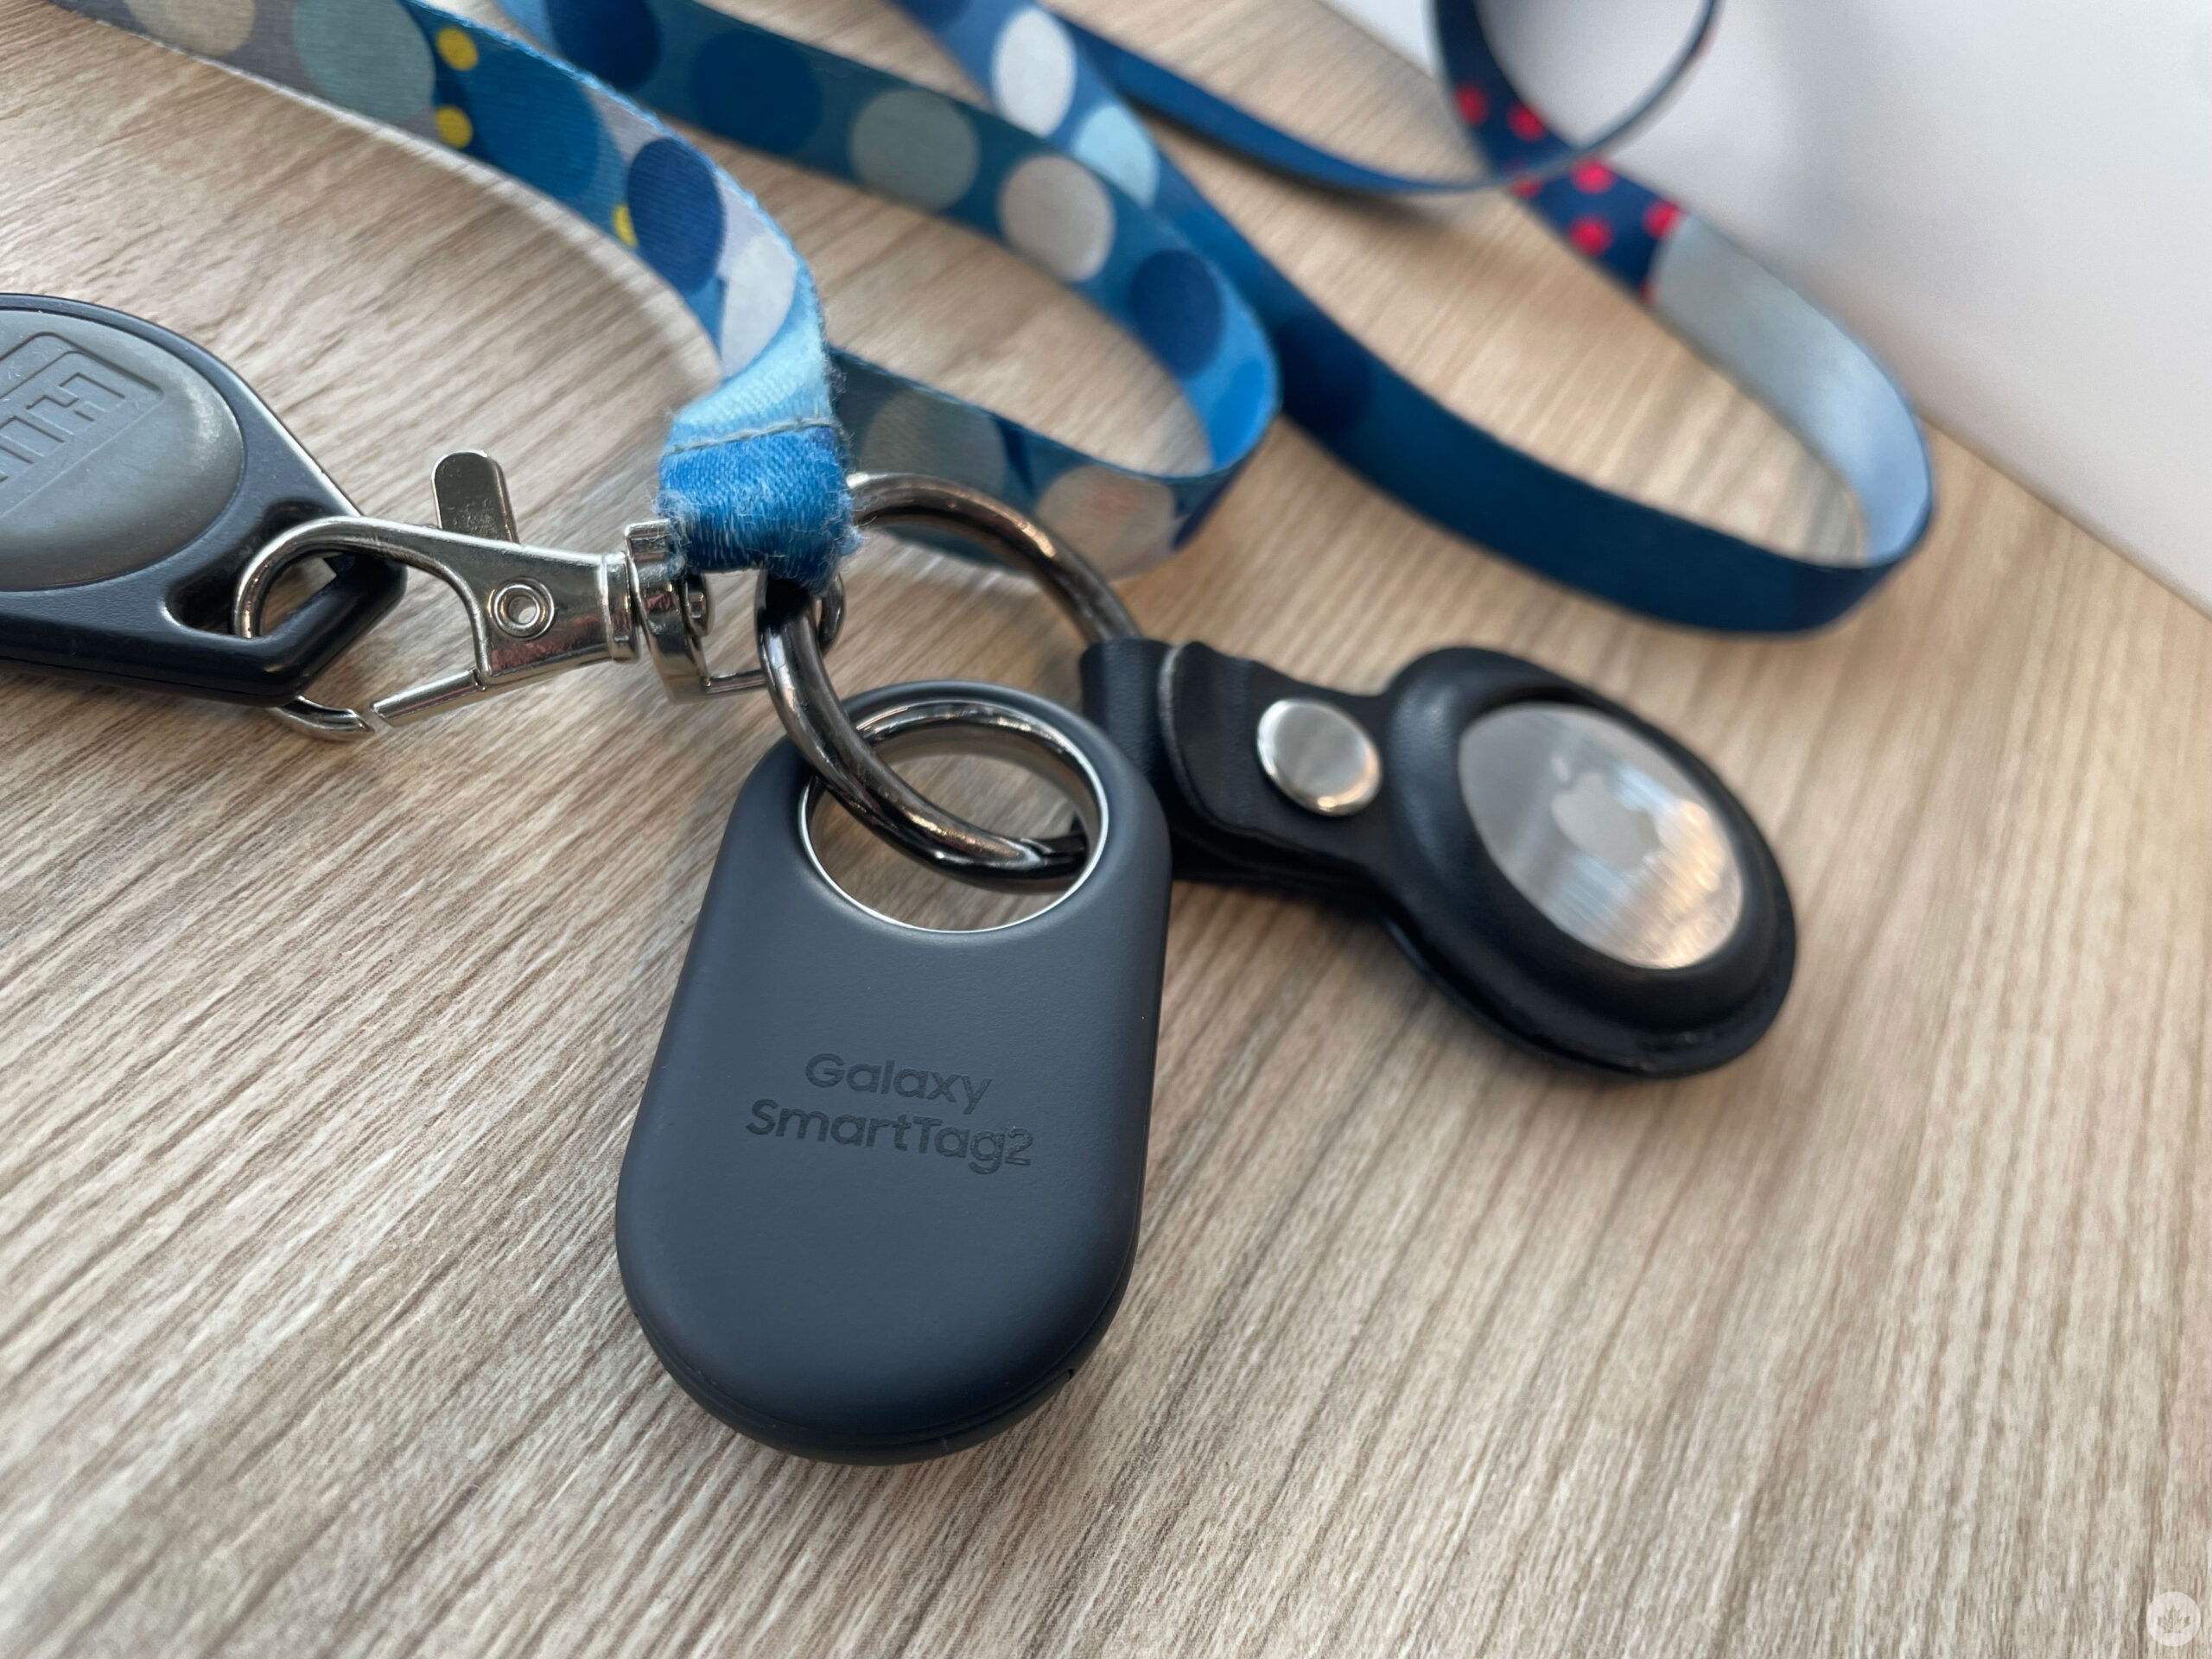 Samsung's SmartTag 2 is a sleek upgrade exclusive to Galaxy users